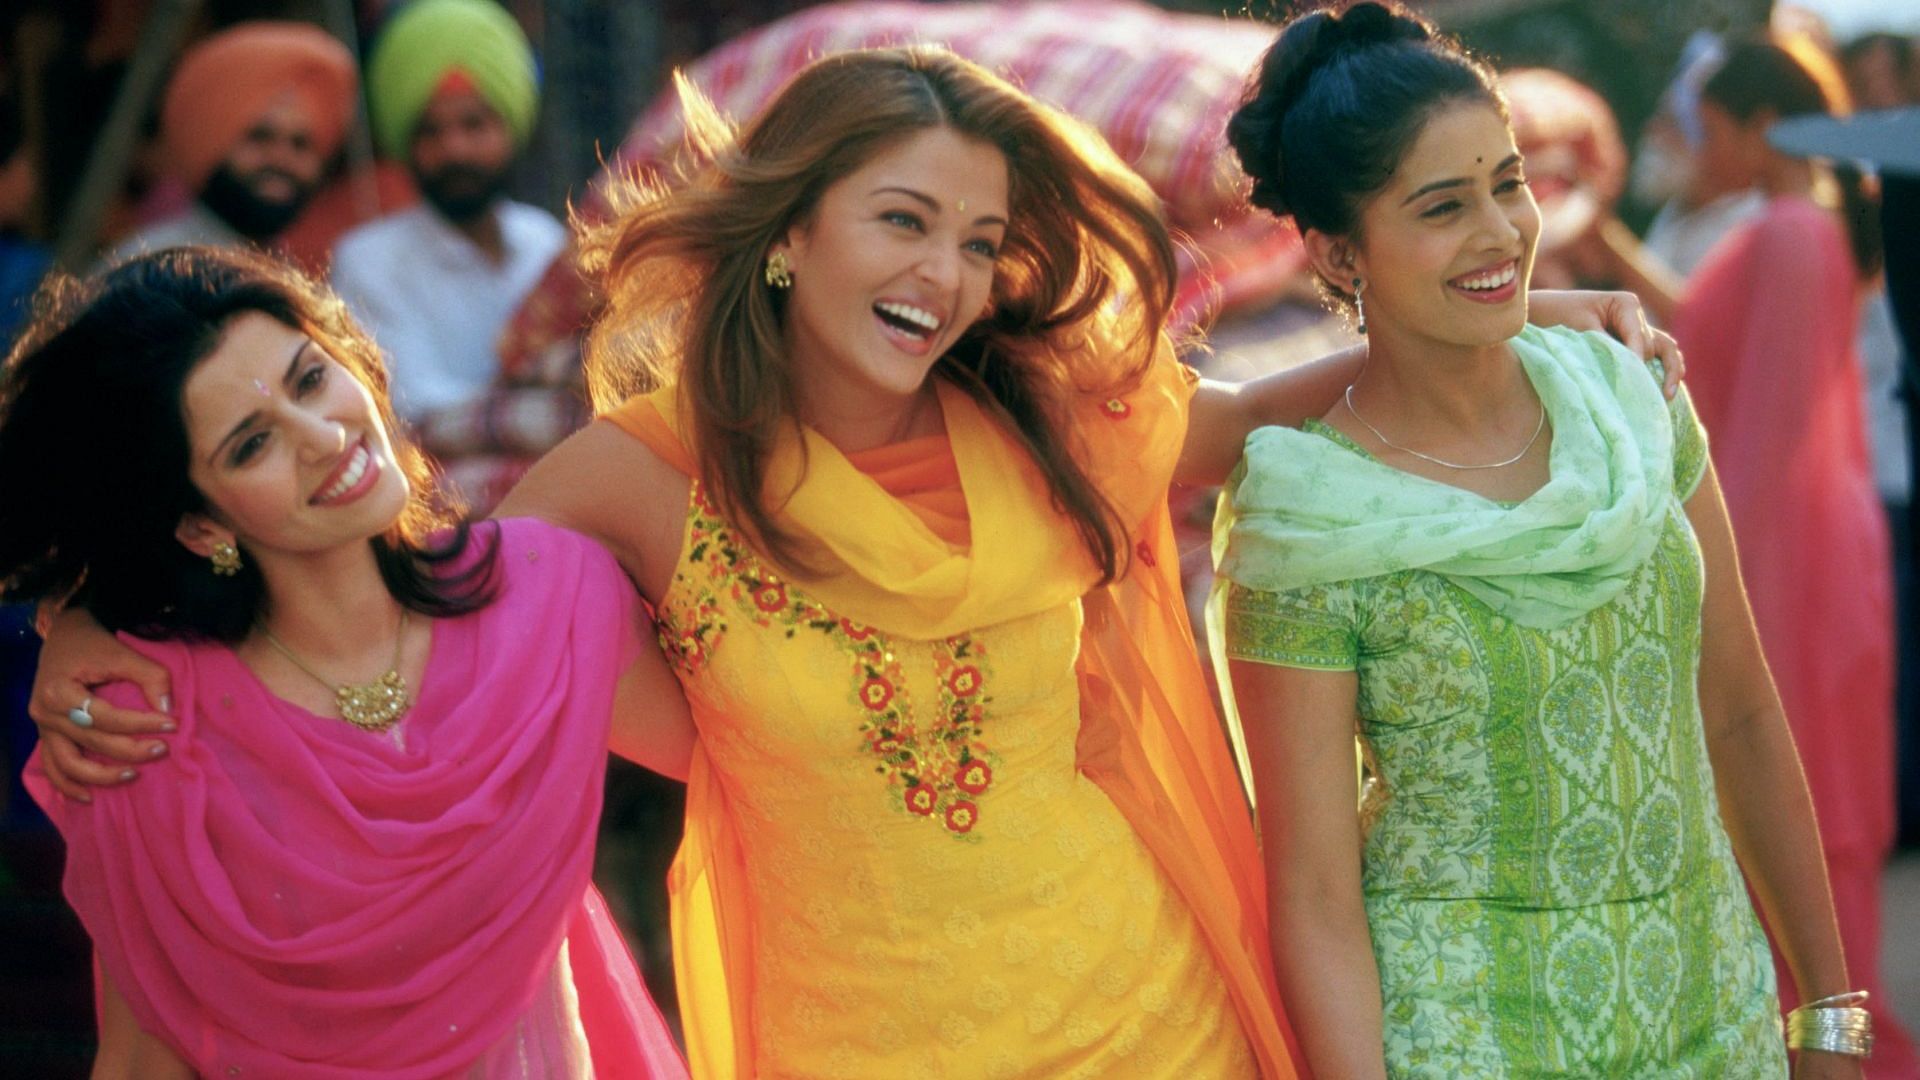 This ‘Bride and Prejudice’ drinking game will get you high in no time.&nbsp;